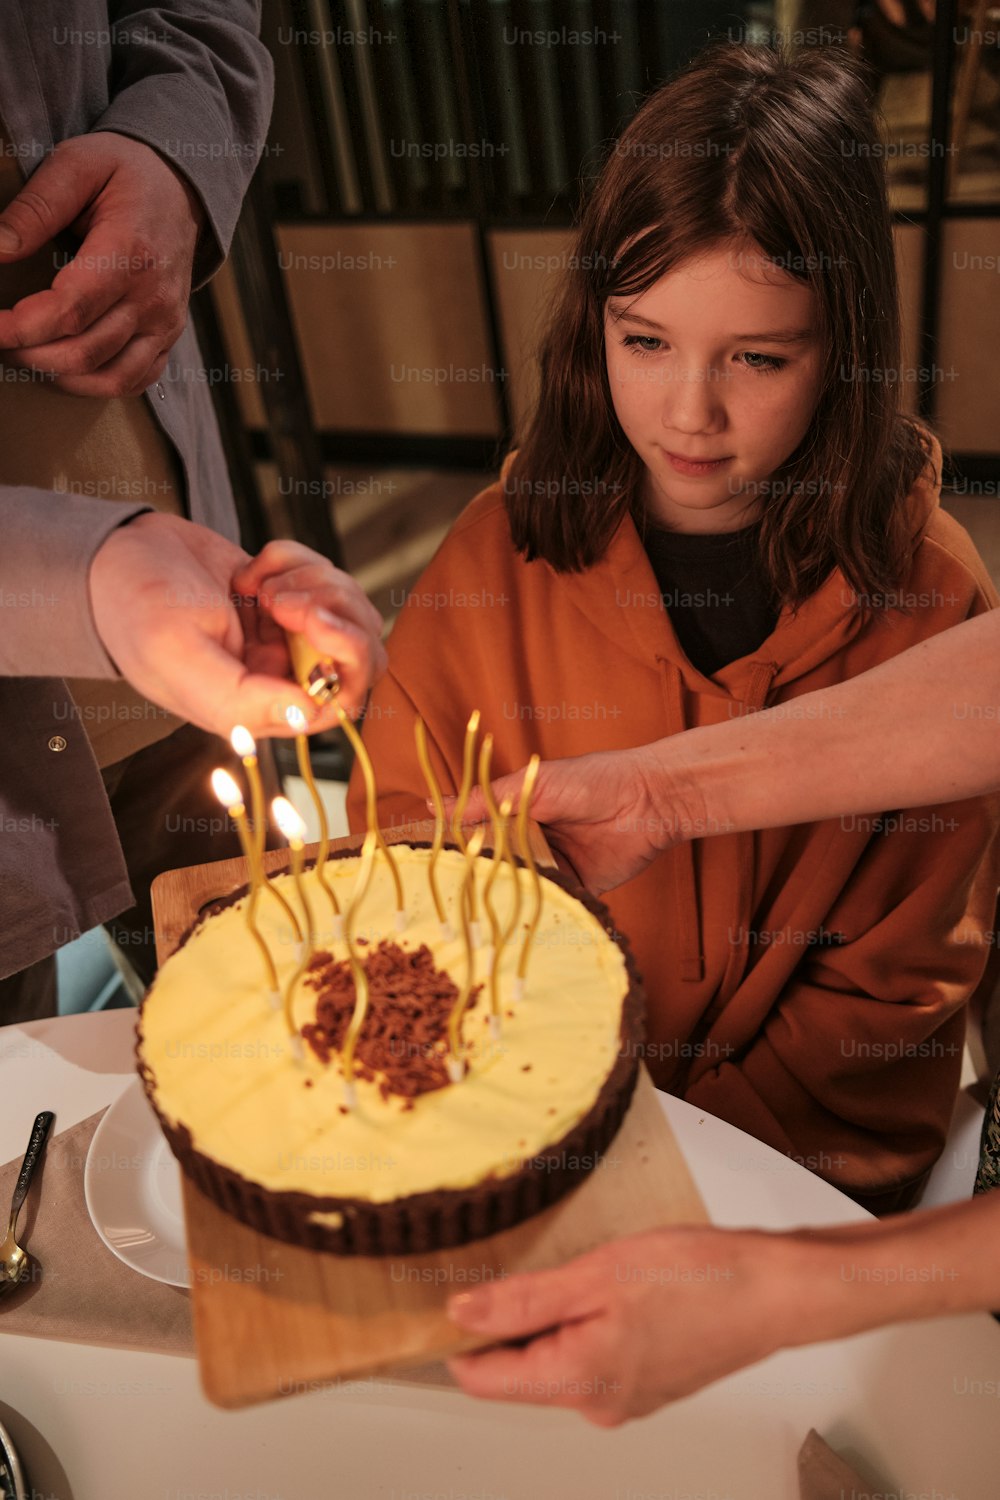 a little girl getting ready to blow out candles on her birthday cake